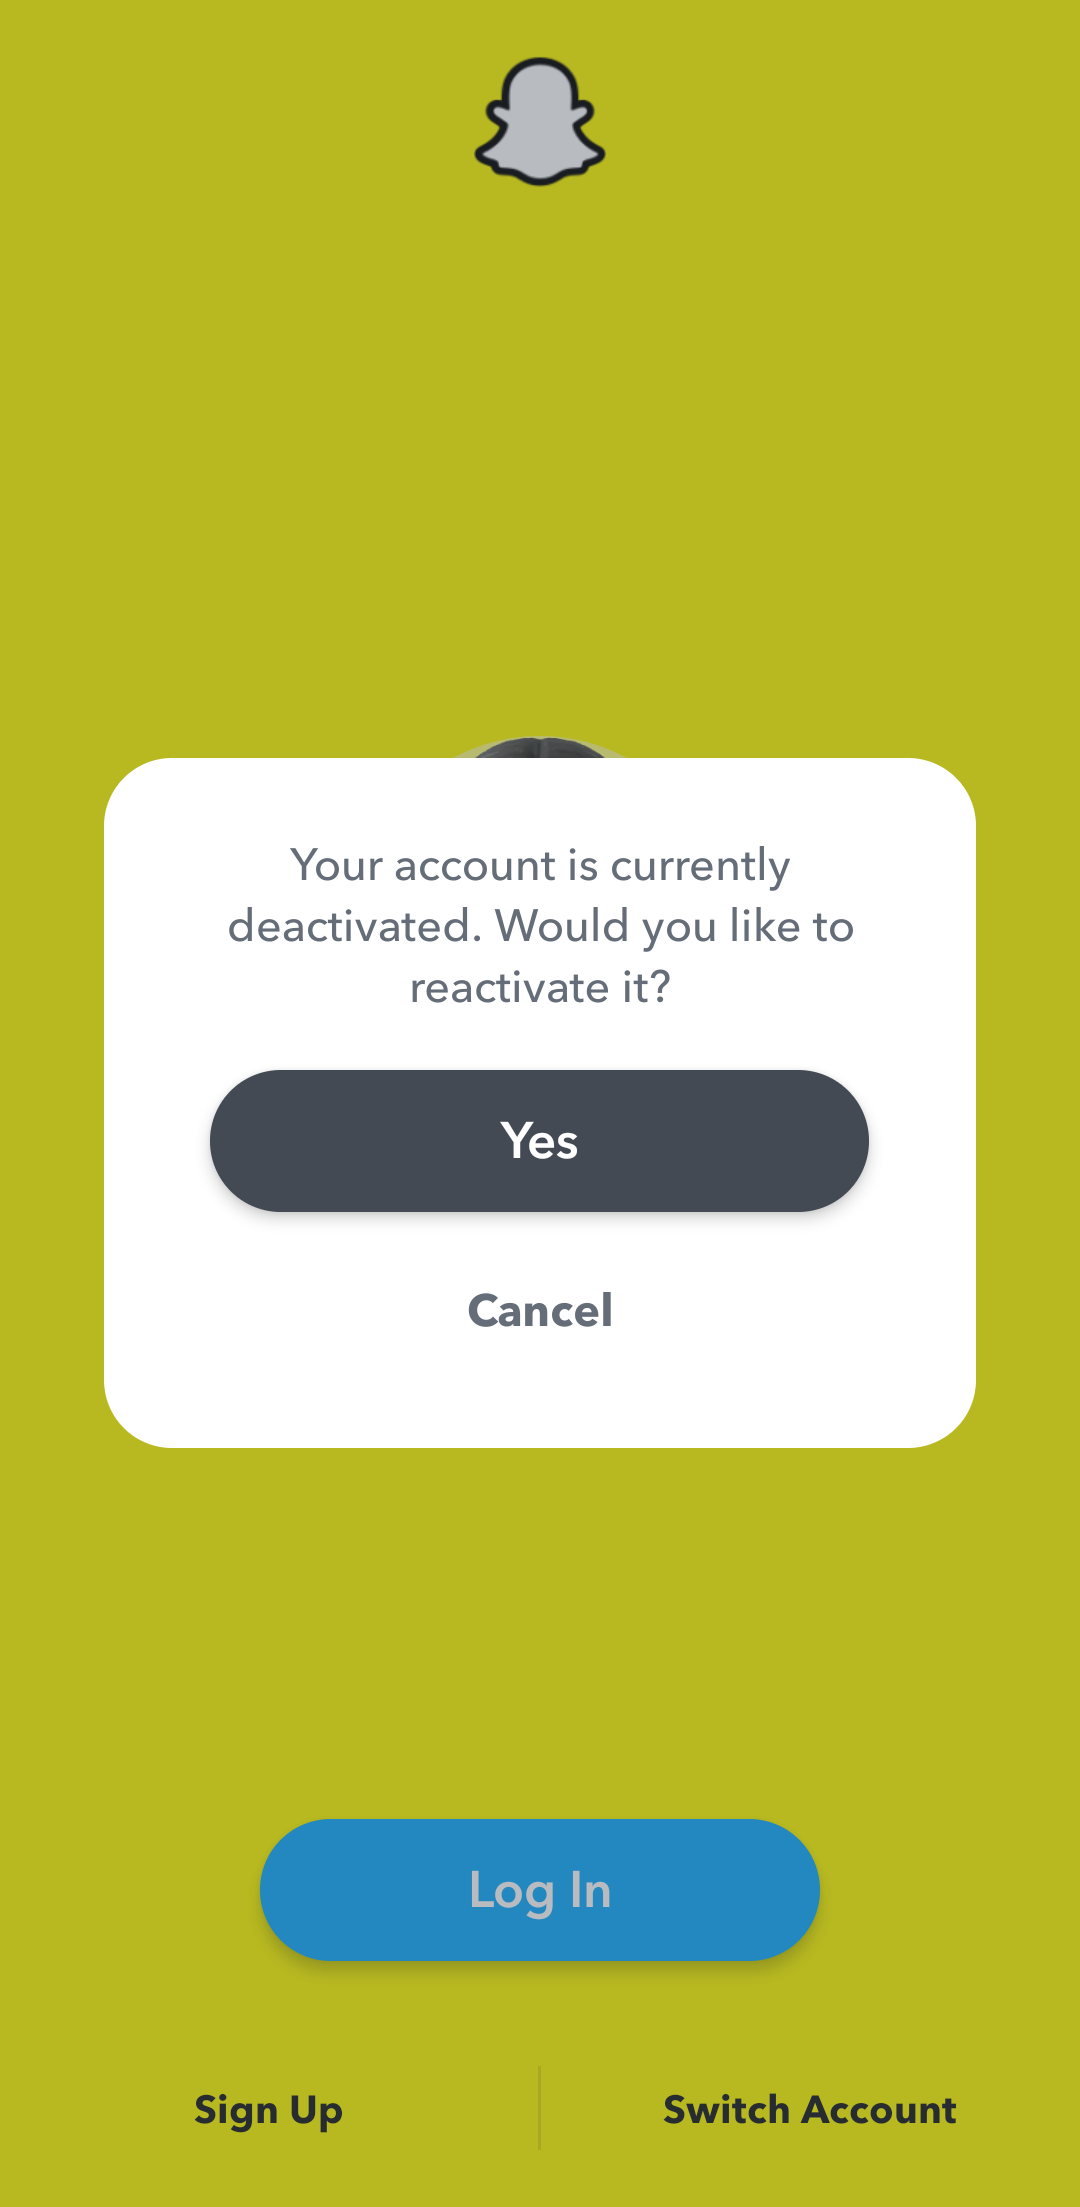 Reactivation confirmation pop-up message on Snapchat mobile app